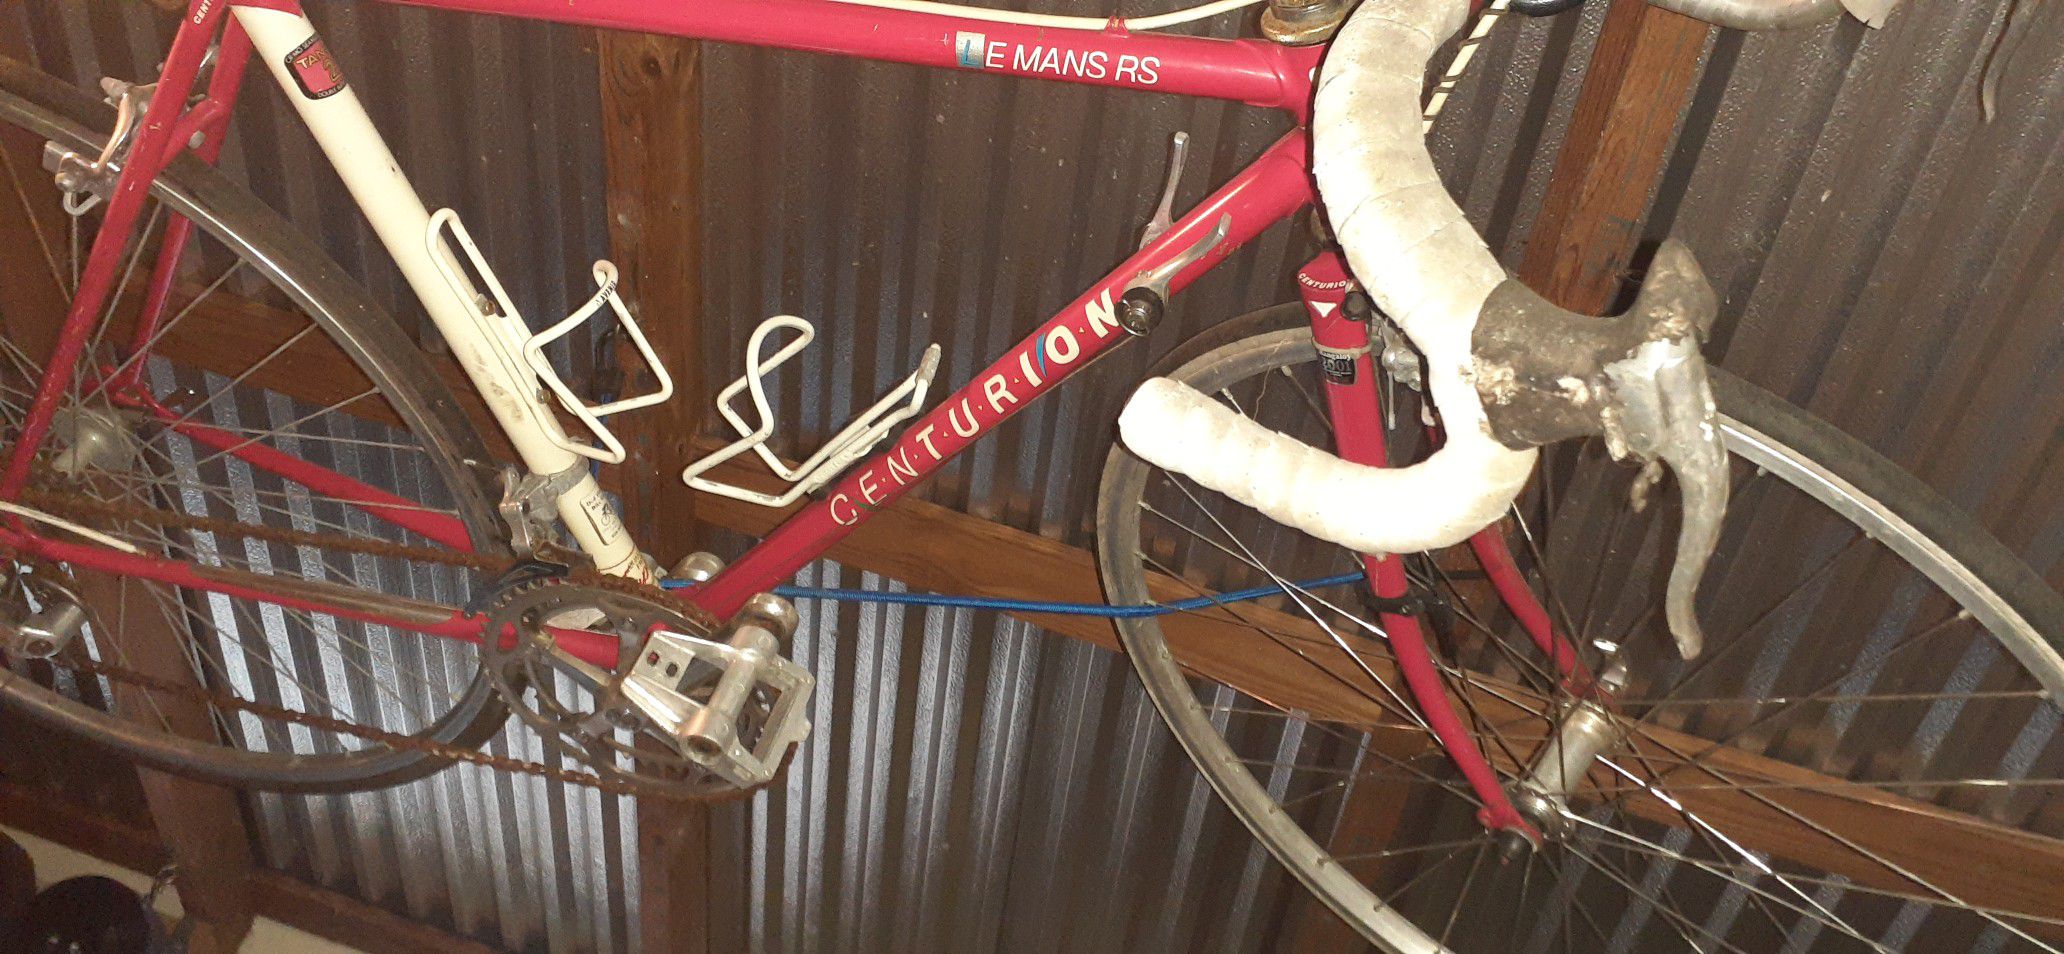 LeMans road bike in excellent shape guys need tires and tubes and probably cables stored 20 years